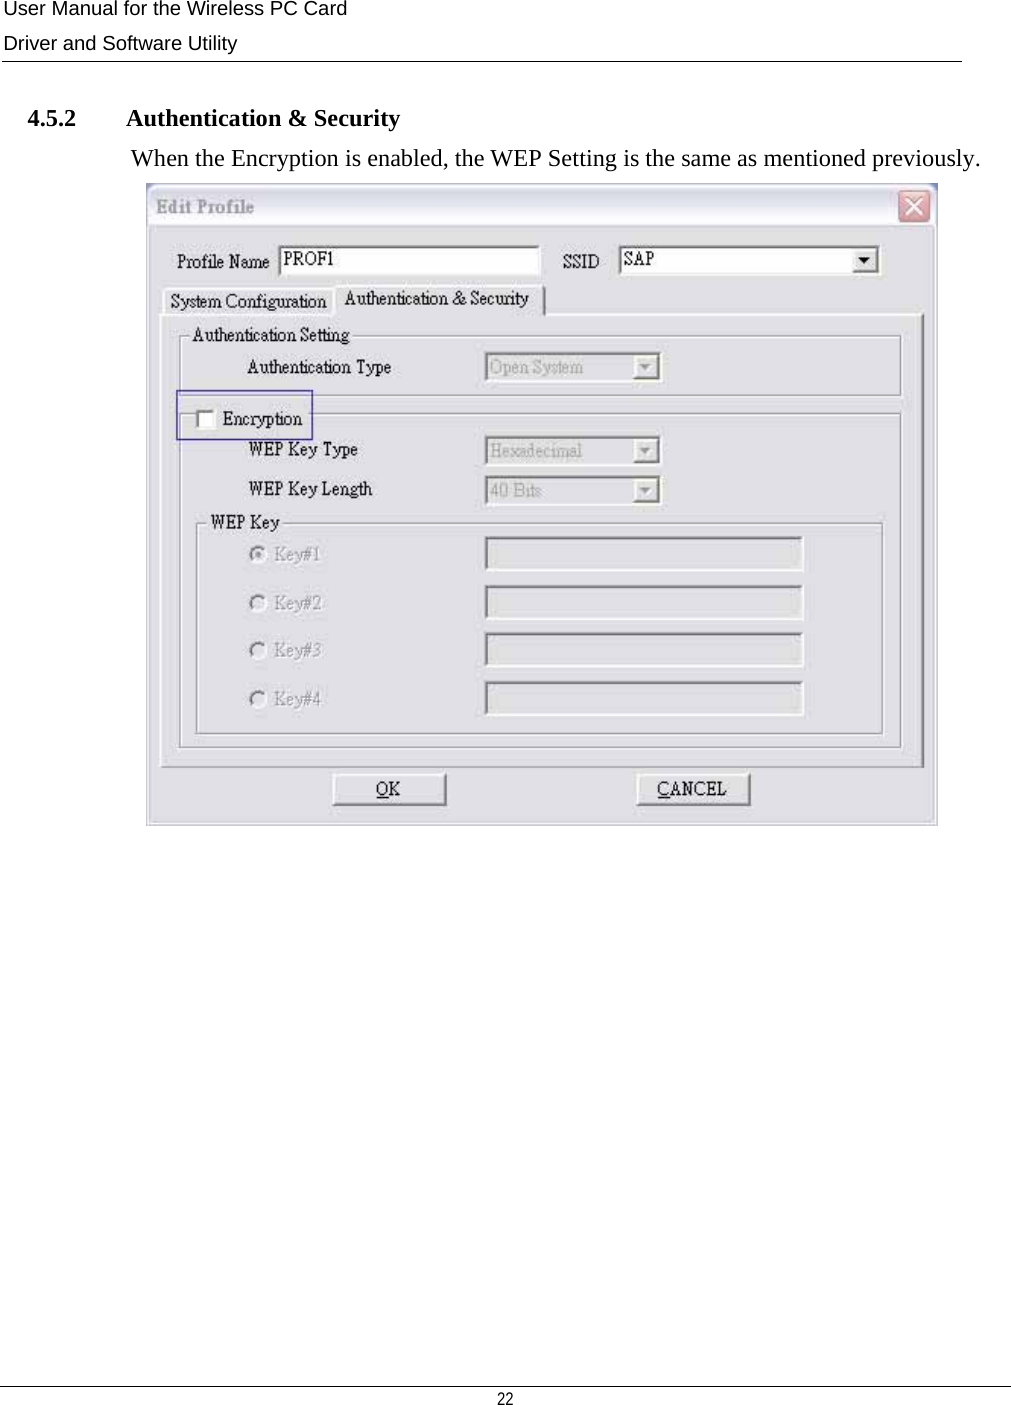 User Manual for the Wireless PC Card Driver and Software Utility  22   4.5.2        Authentication &amp; Security When the Encryption is enabled, the WEP Setting is the same as mentioned previously.              